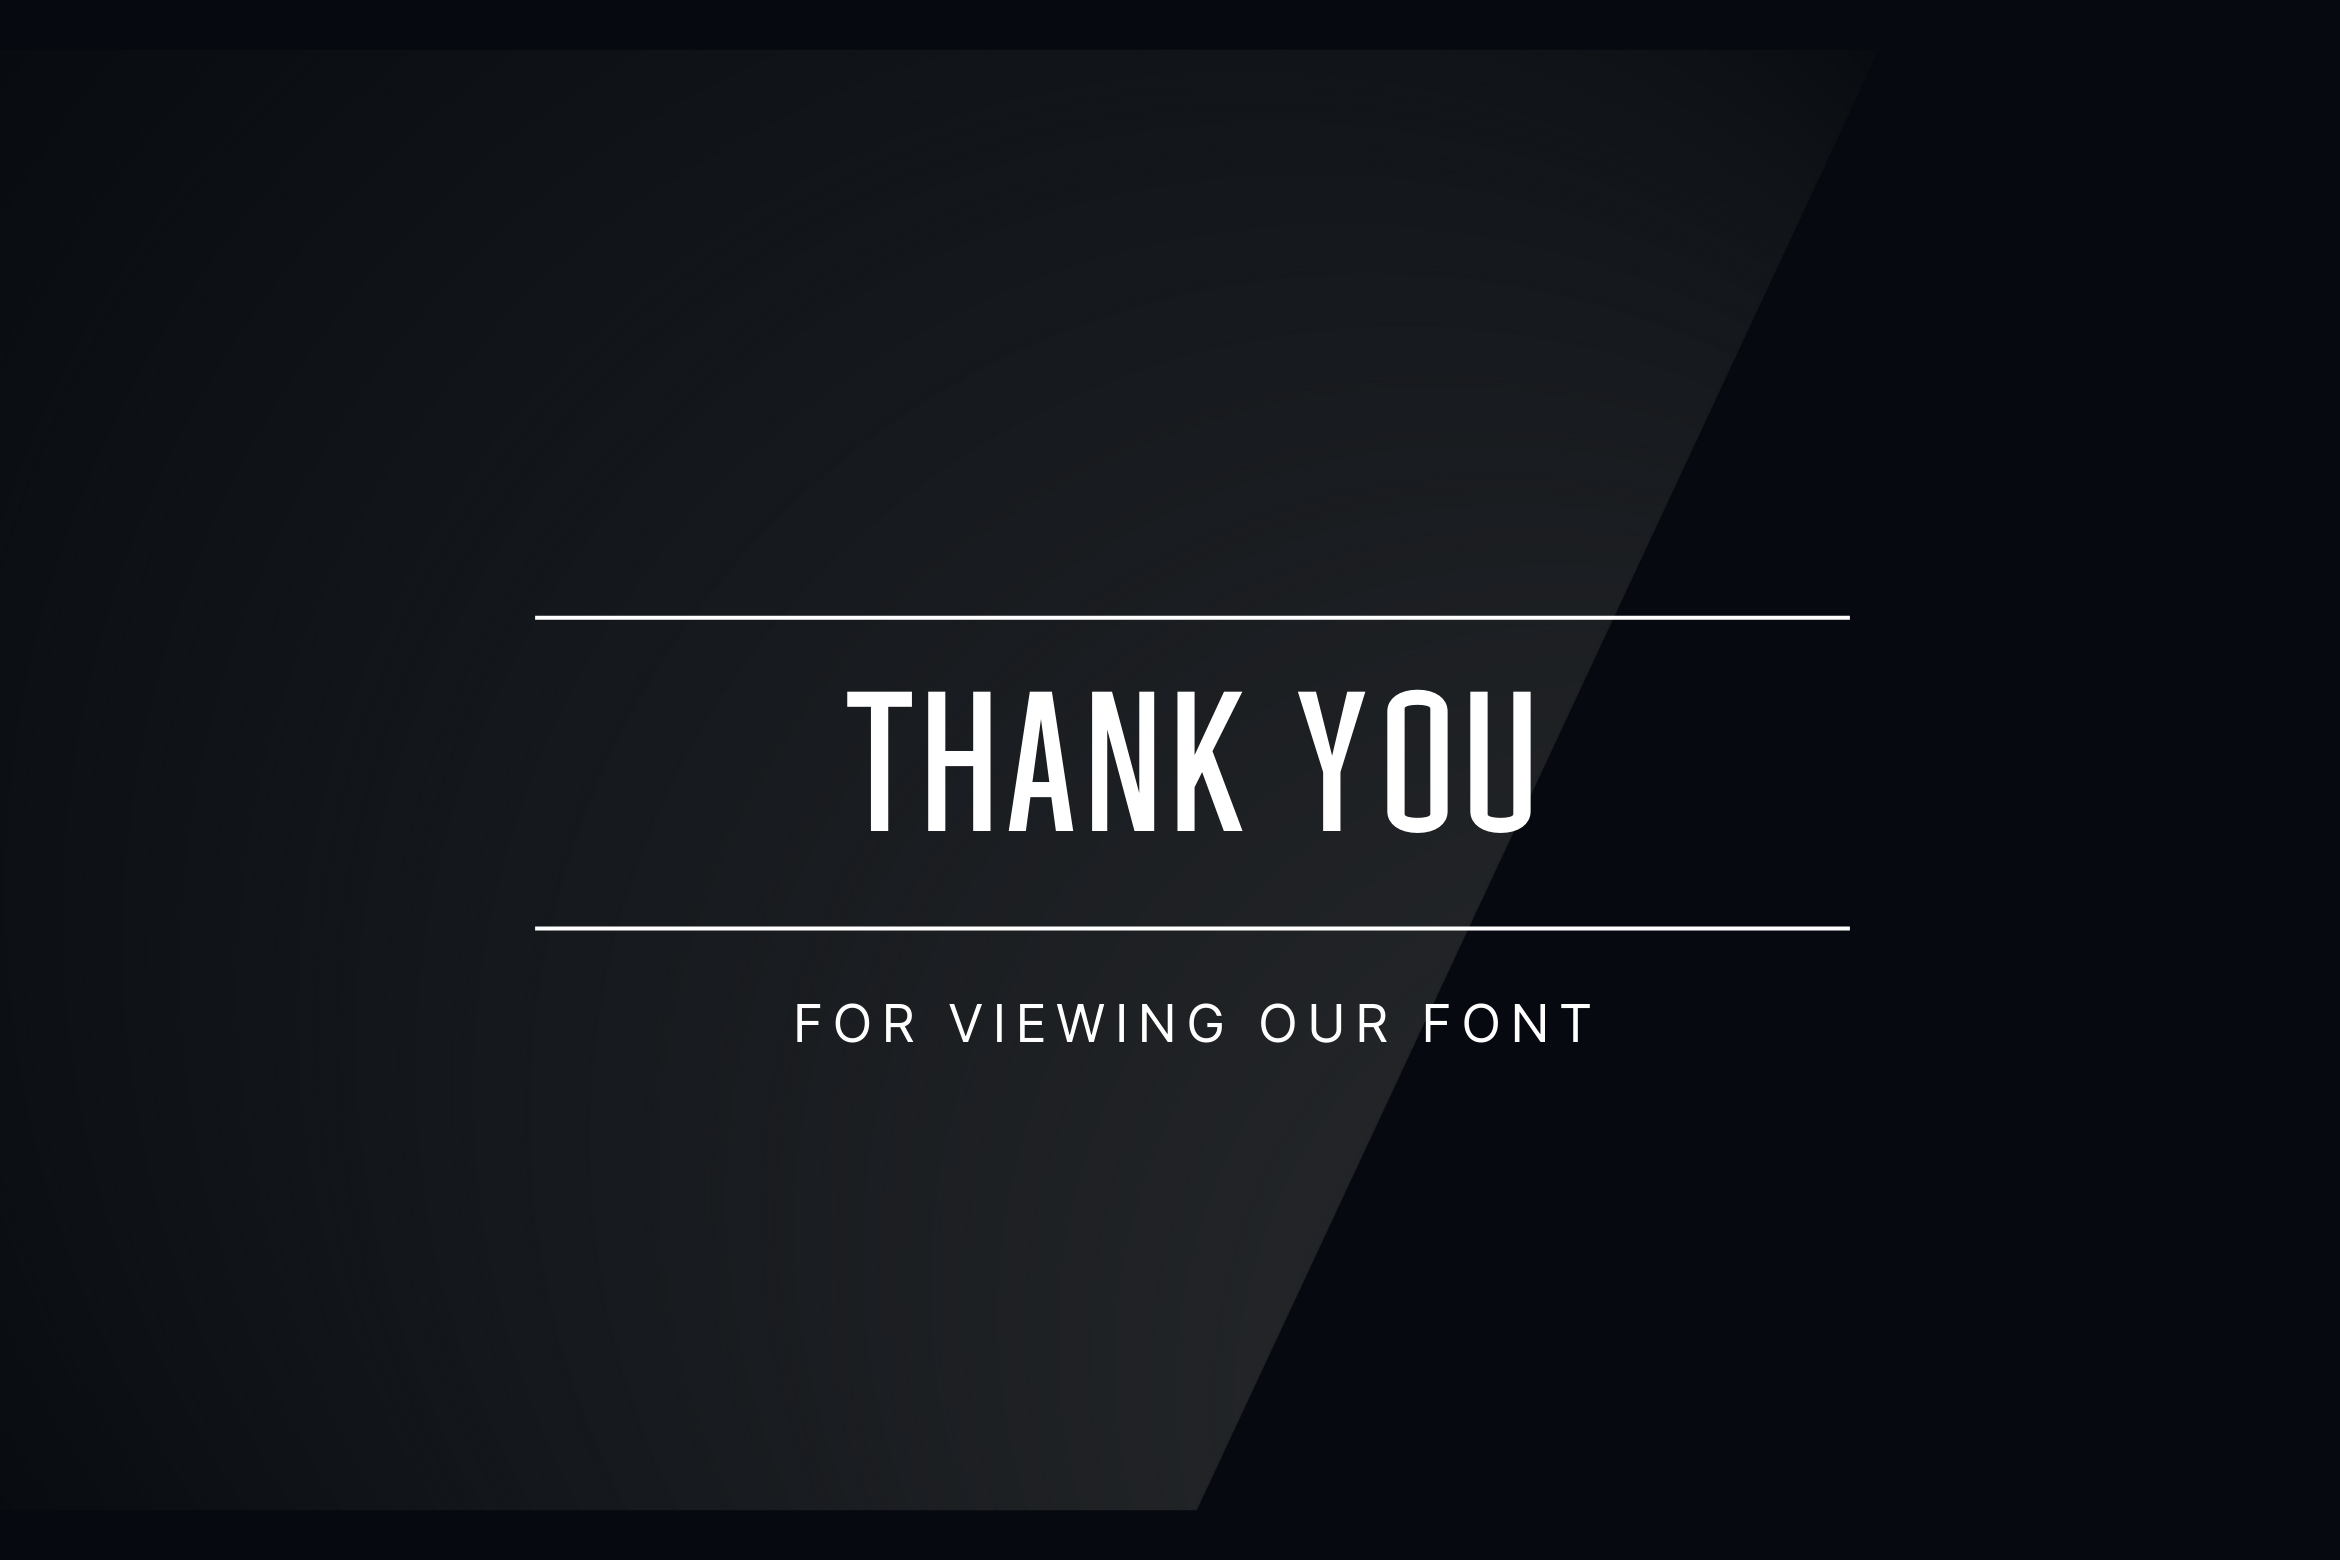 Dark gradient background with "THANK YOU FOR VIEWING OUR FONT" in the center, text uses Wellston font, giving a professional and sleek look.